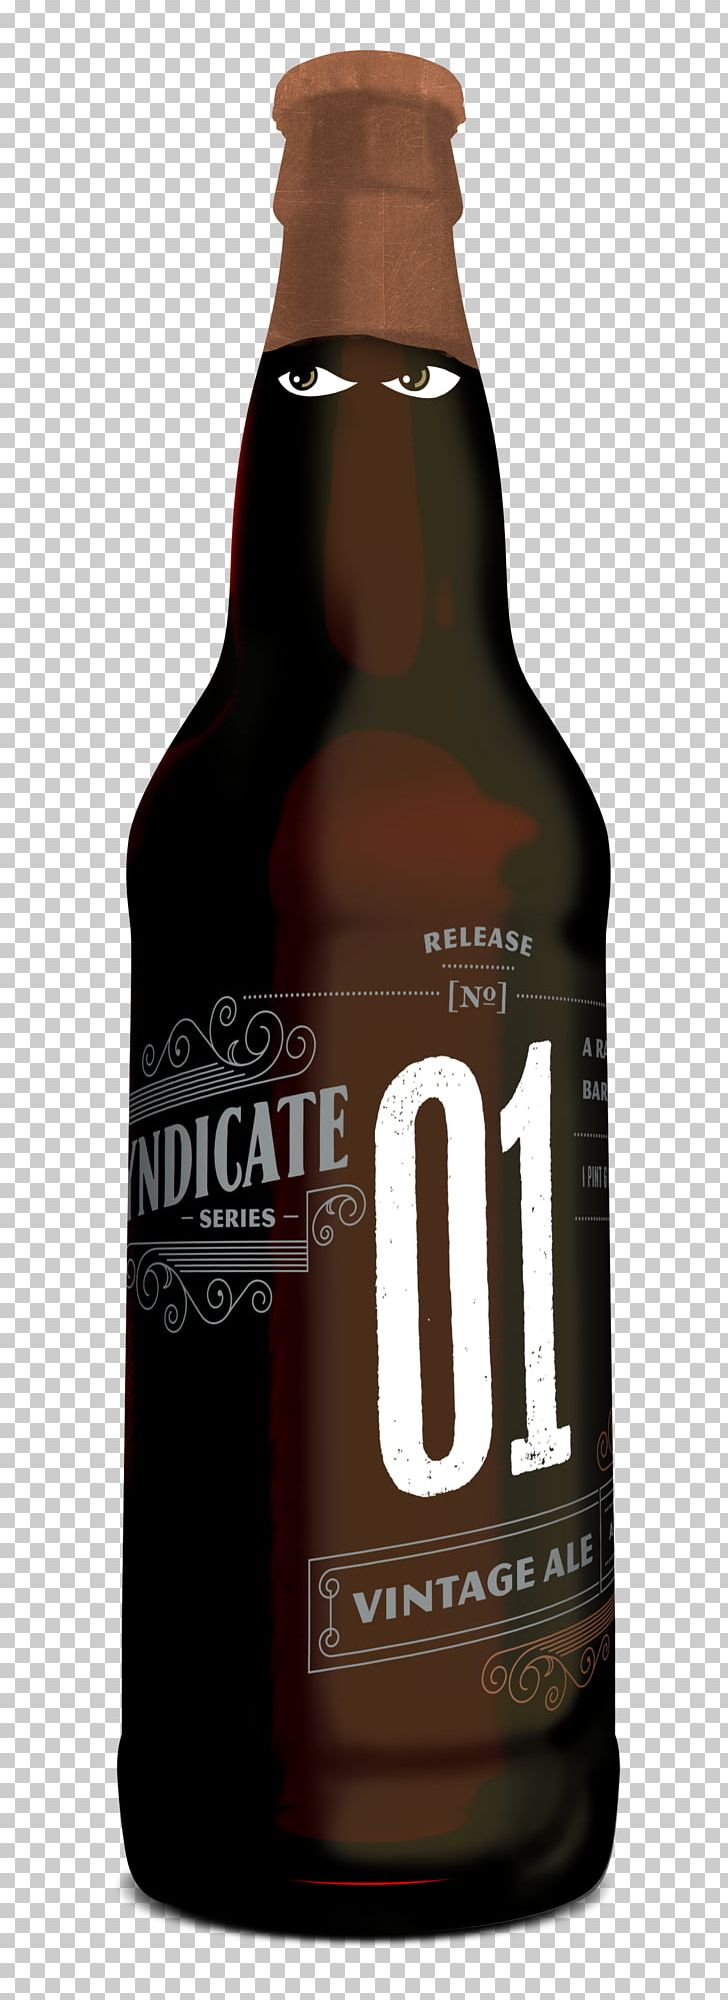 Speakeasy Ales & Lagers Beer Bottle PNG, Clipart, Alcoholic Beverage, Ale, Beer, Beer Bottle, Beverage Can Free PNG Download